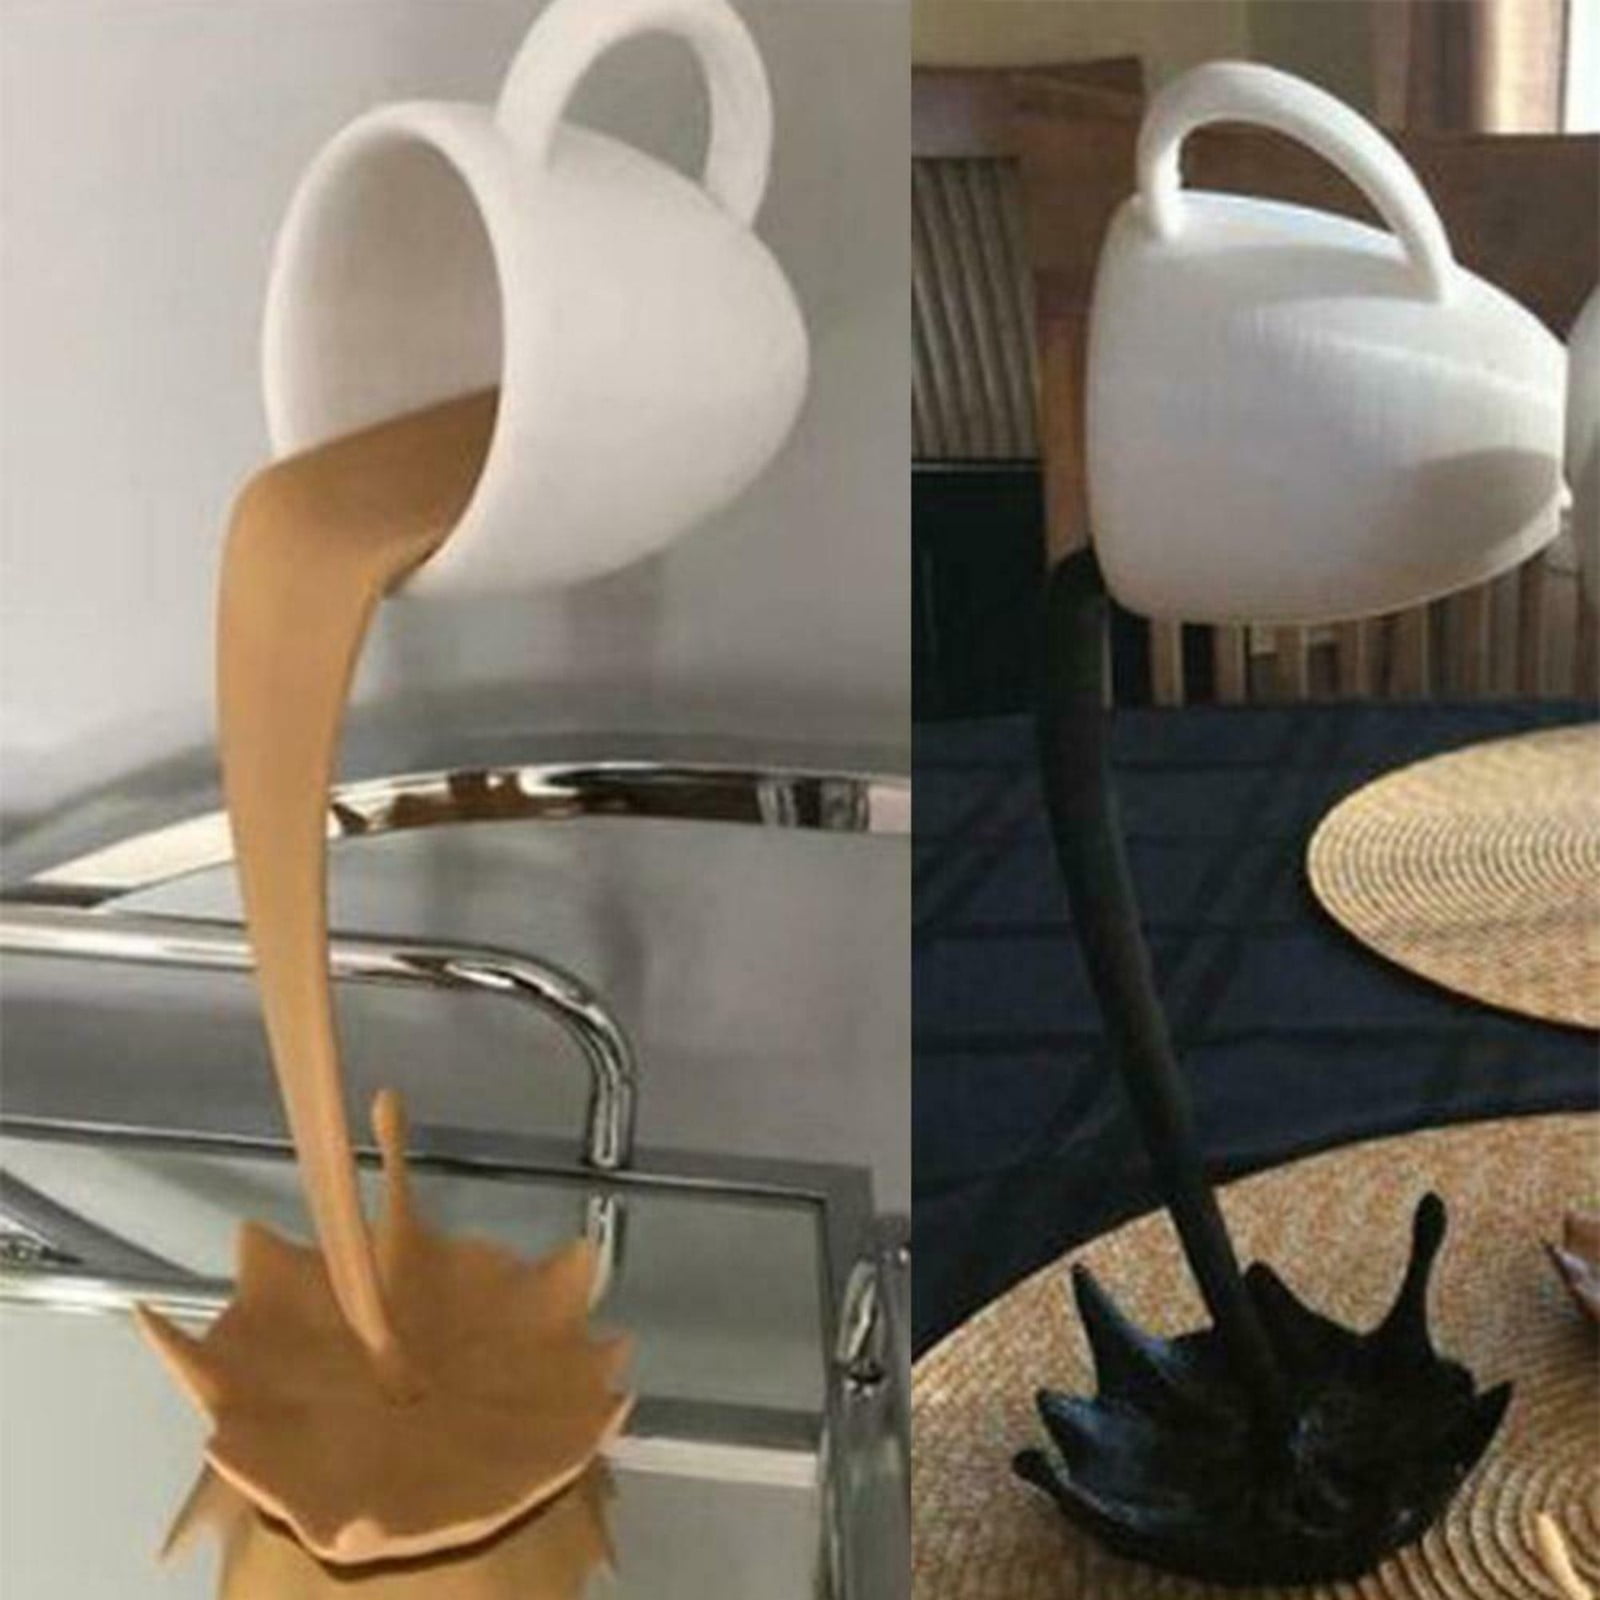 Oavqhlg3b Floating Coffee Cups Coffee Bar Accessories Magic Pouring Spilling Splash Coffee Mugs Funny Sculpture Art Decor for Home,Kitchen,Present for